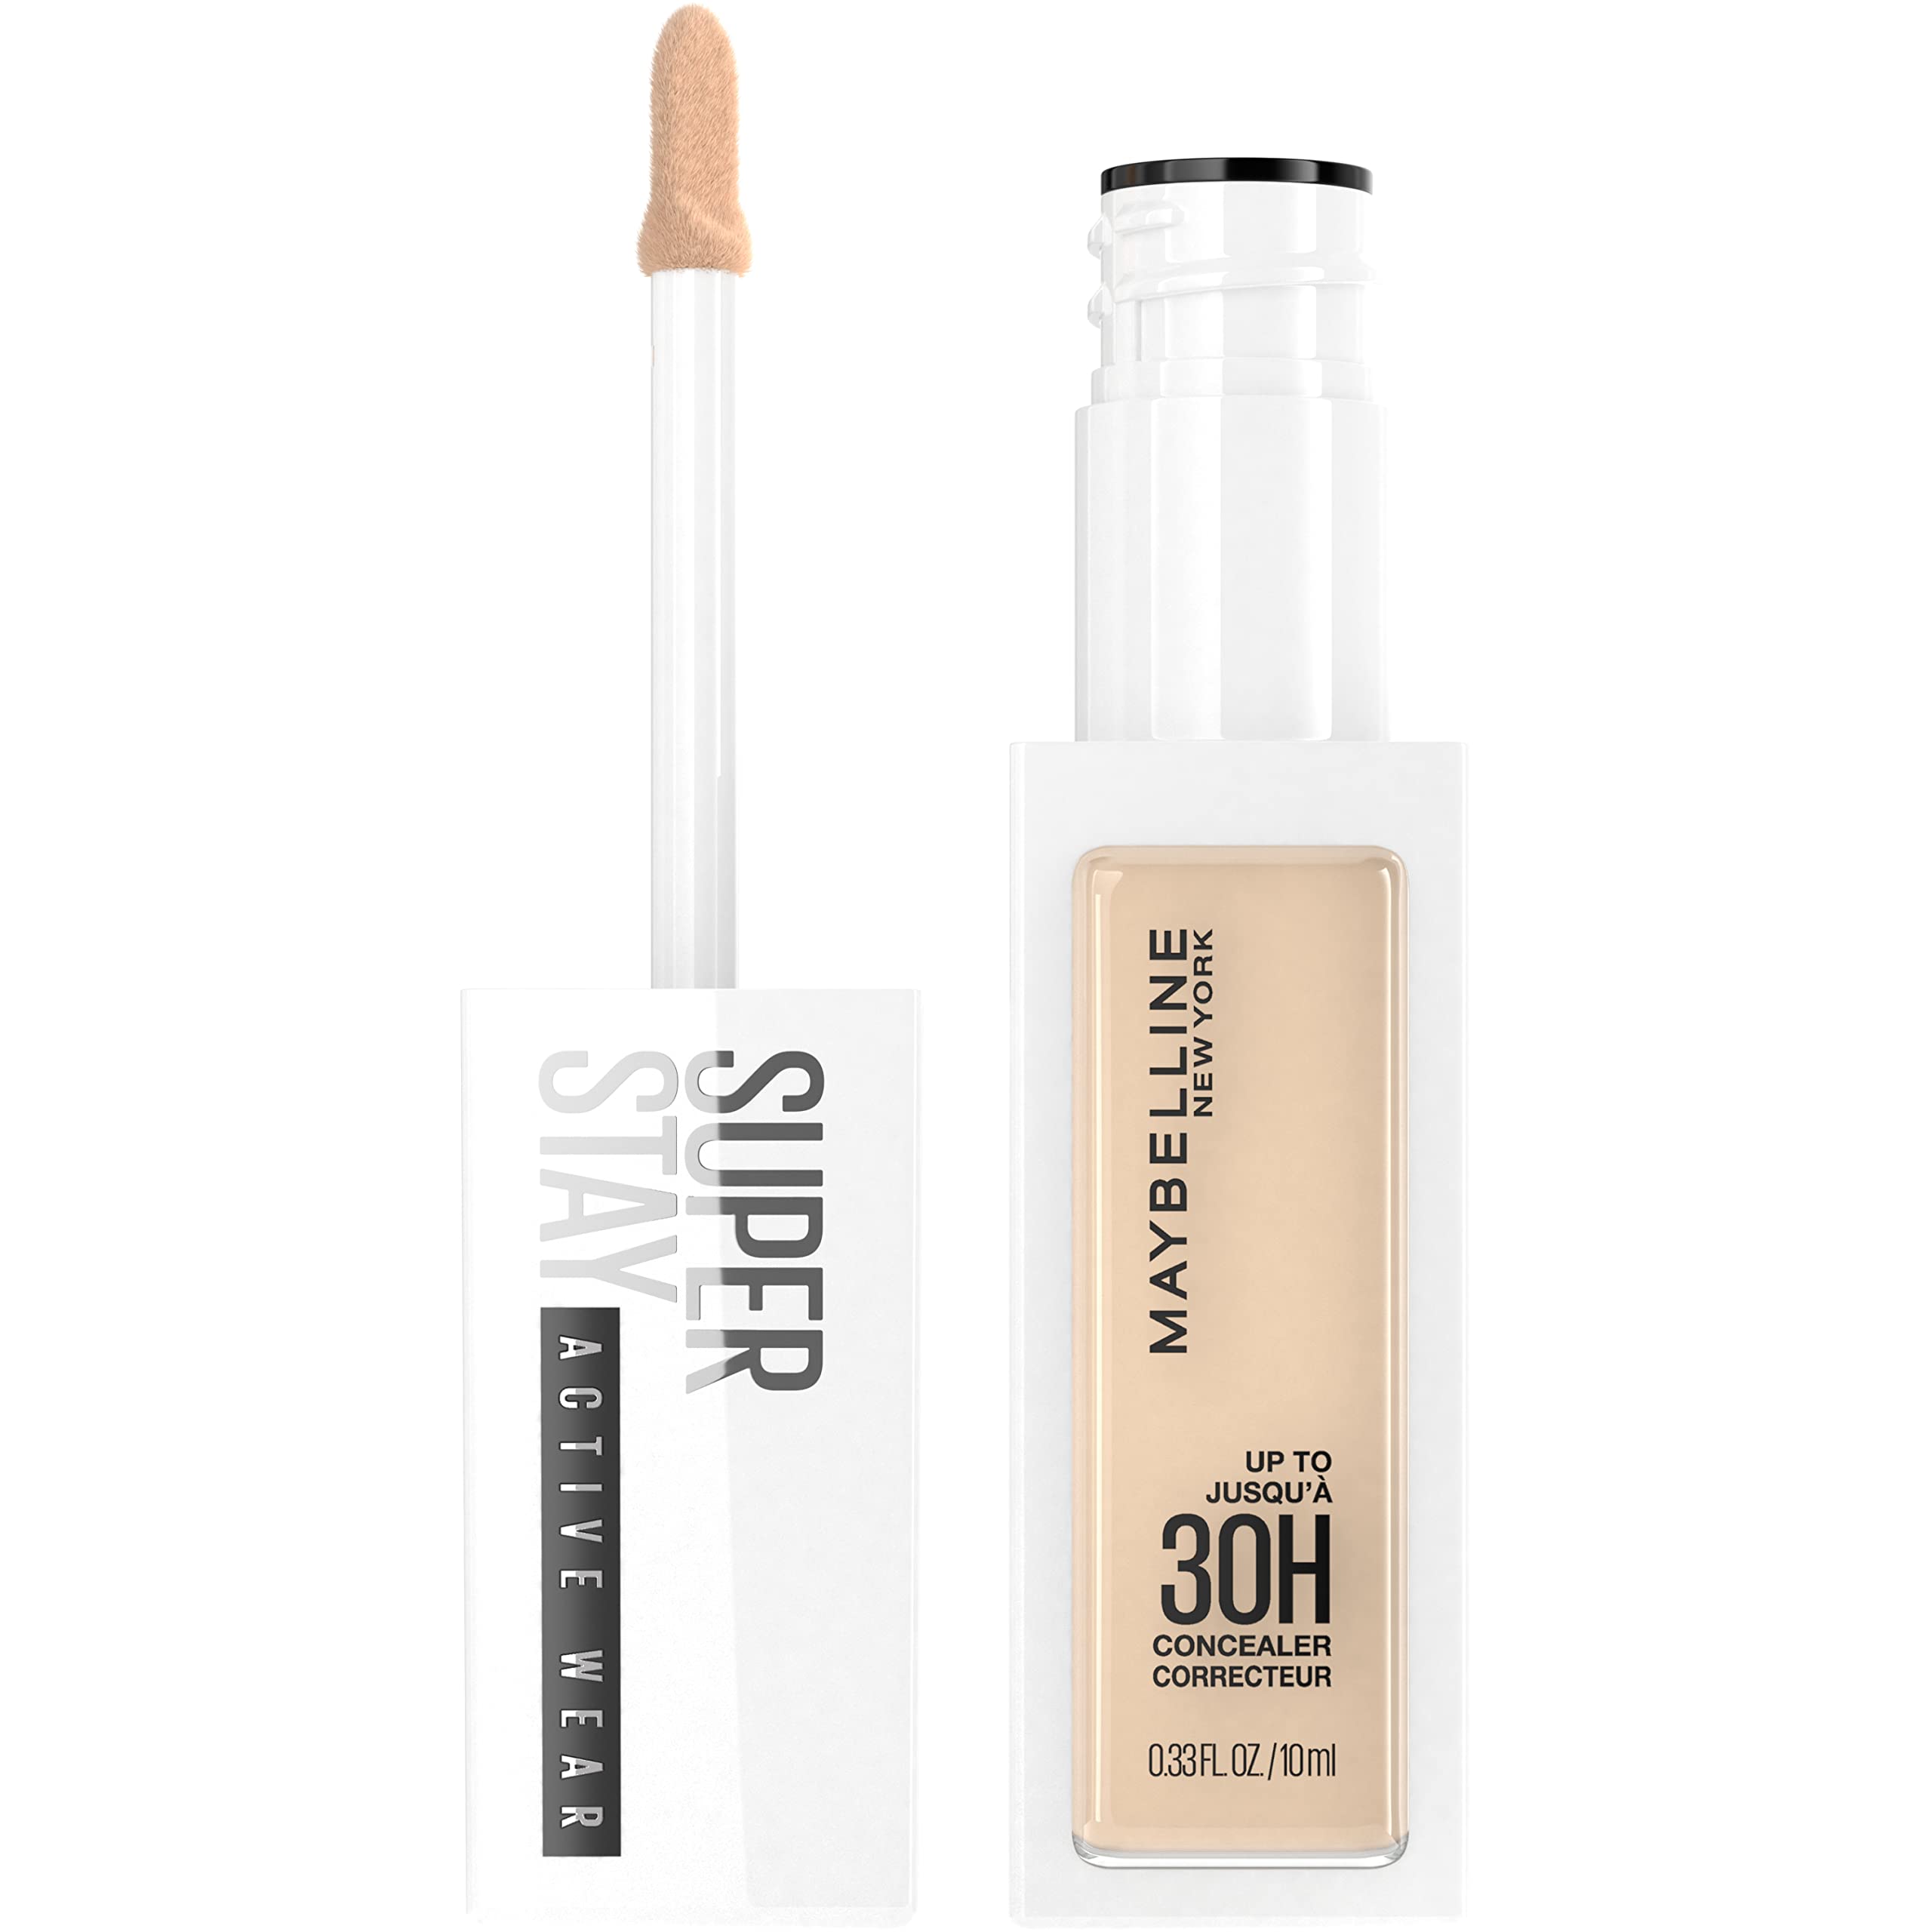 Maybelline New York Super Stay Liquid Concealer Makeup, Full Coverage Concealer, Up to 30 Hour Wear, Transfer Resistant, Natural Matte Finish, Oil-free, Available in 16 Shades, 15, 1 Count